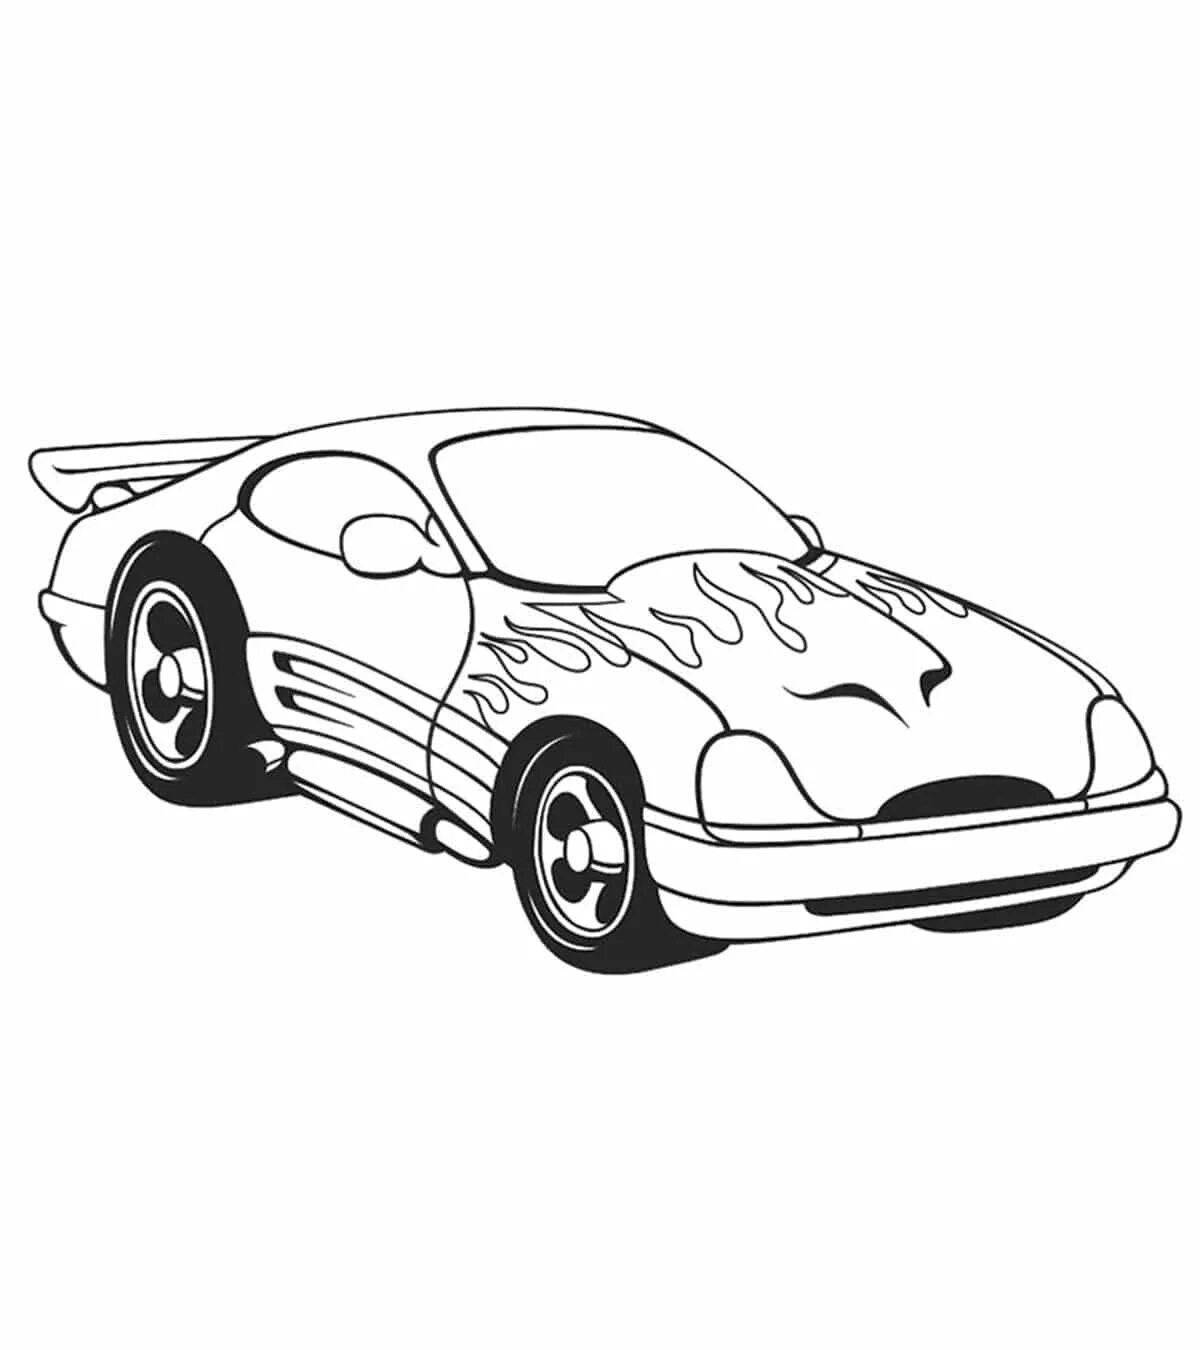 Cute race car coloring page for preschoolers